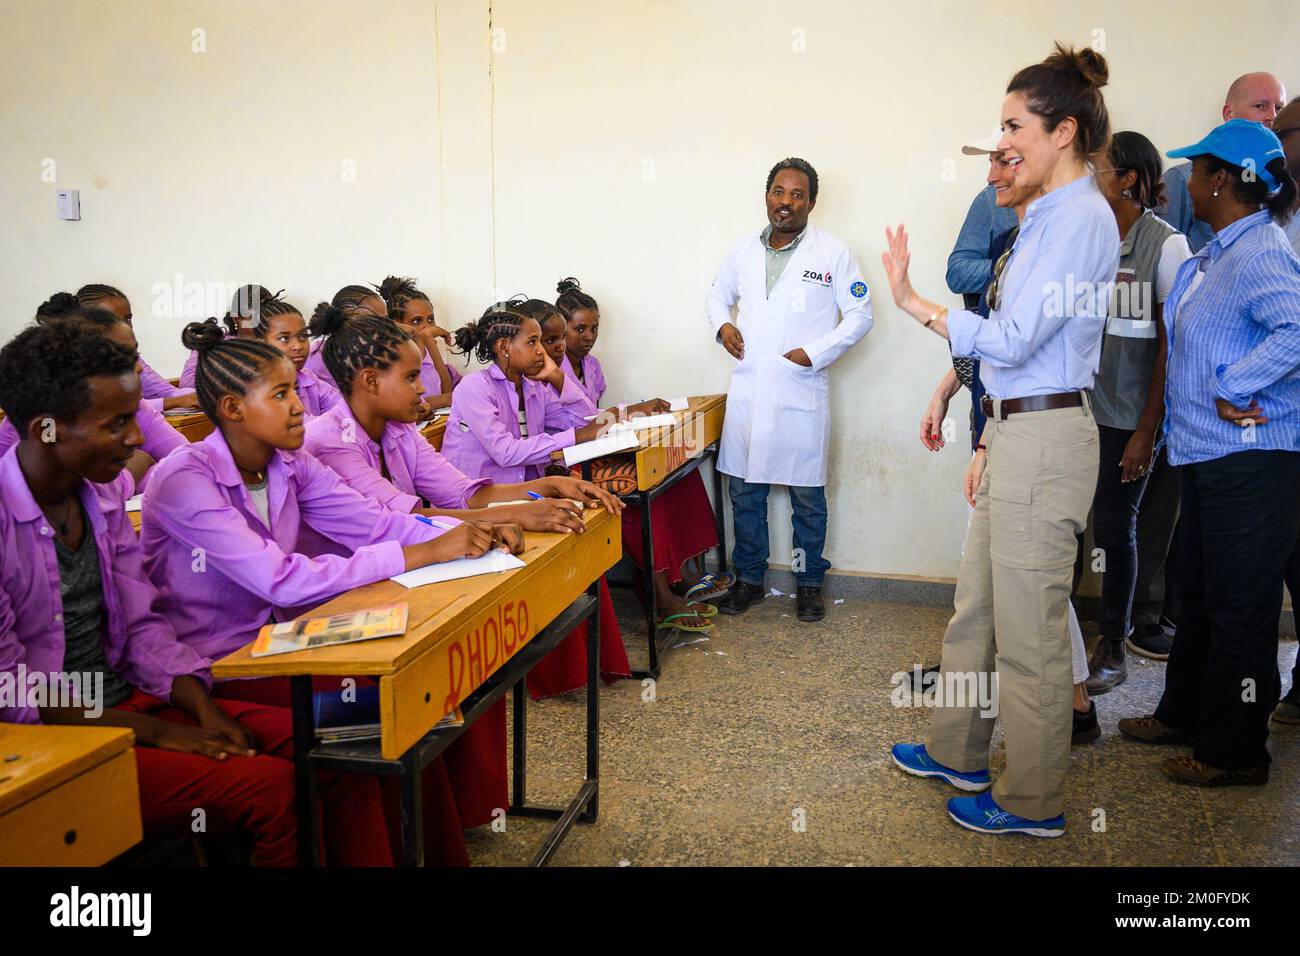 On March 27th 2019 Crown Princess Mary and Minister for Development Ulla Tørnes arrived in Ethiopia on a two day visit to promote equality and gender issues in the country. The second day they spend in the northern town of Shire. Here they were greeted by traditional dancers, visited a refugee camp and a school where they planted trees with the pupils. As a conclusion of the visit they had dinner with the first female President Sahle-Work Zewde. Stock Photo